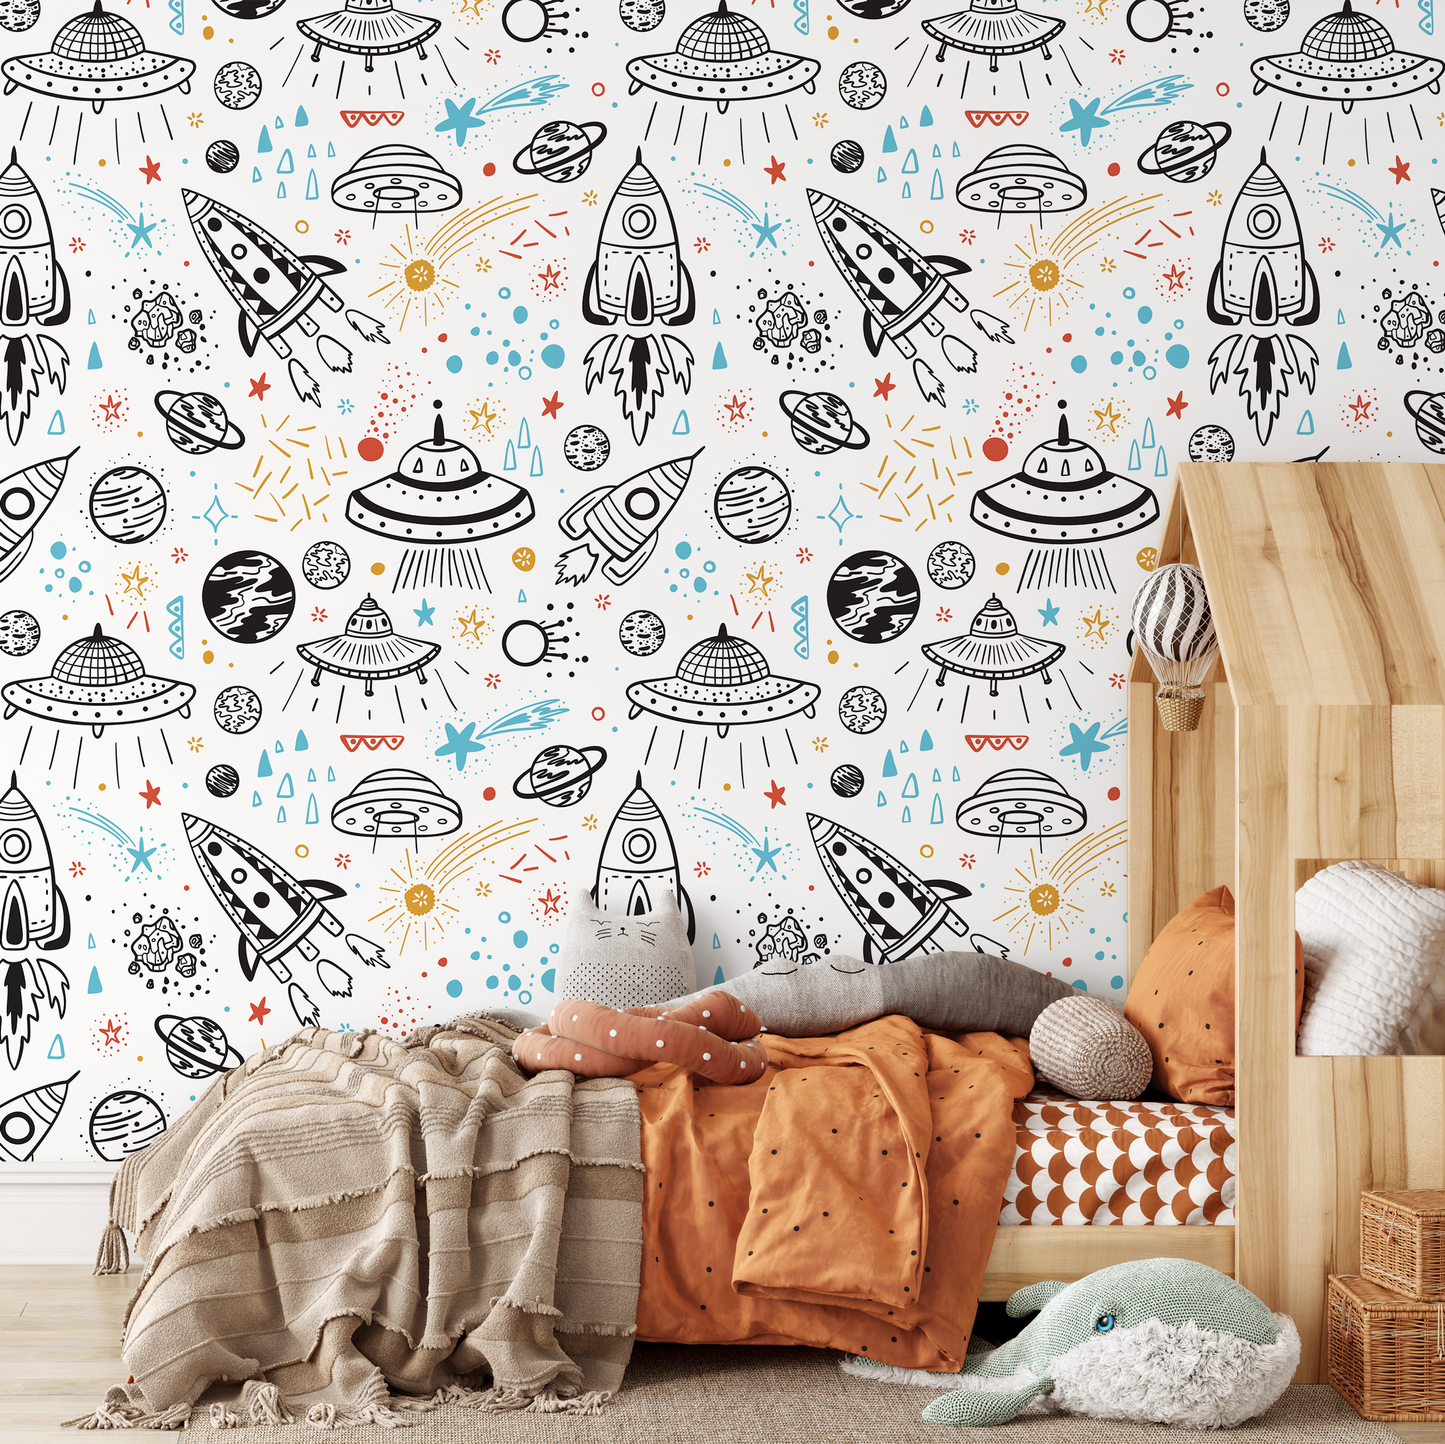 Wallpaper Peel and Stick Wallpaper Removable Wallpaper Home Decor Wall Art Wall Decor Room Decor / Blue Space Kids Wallpaper - A654